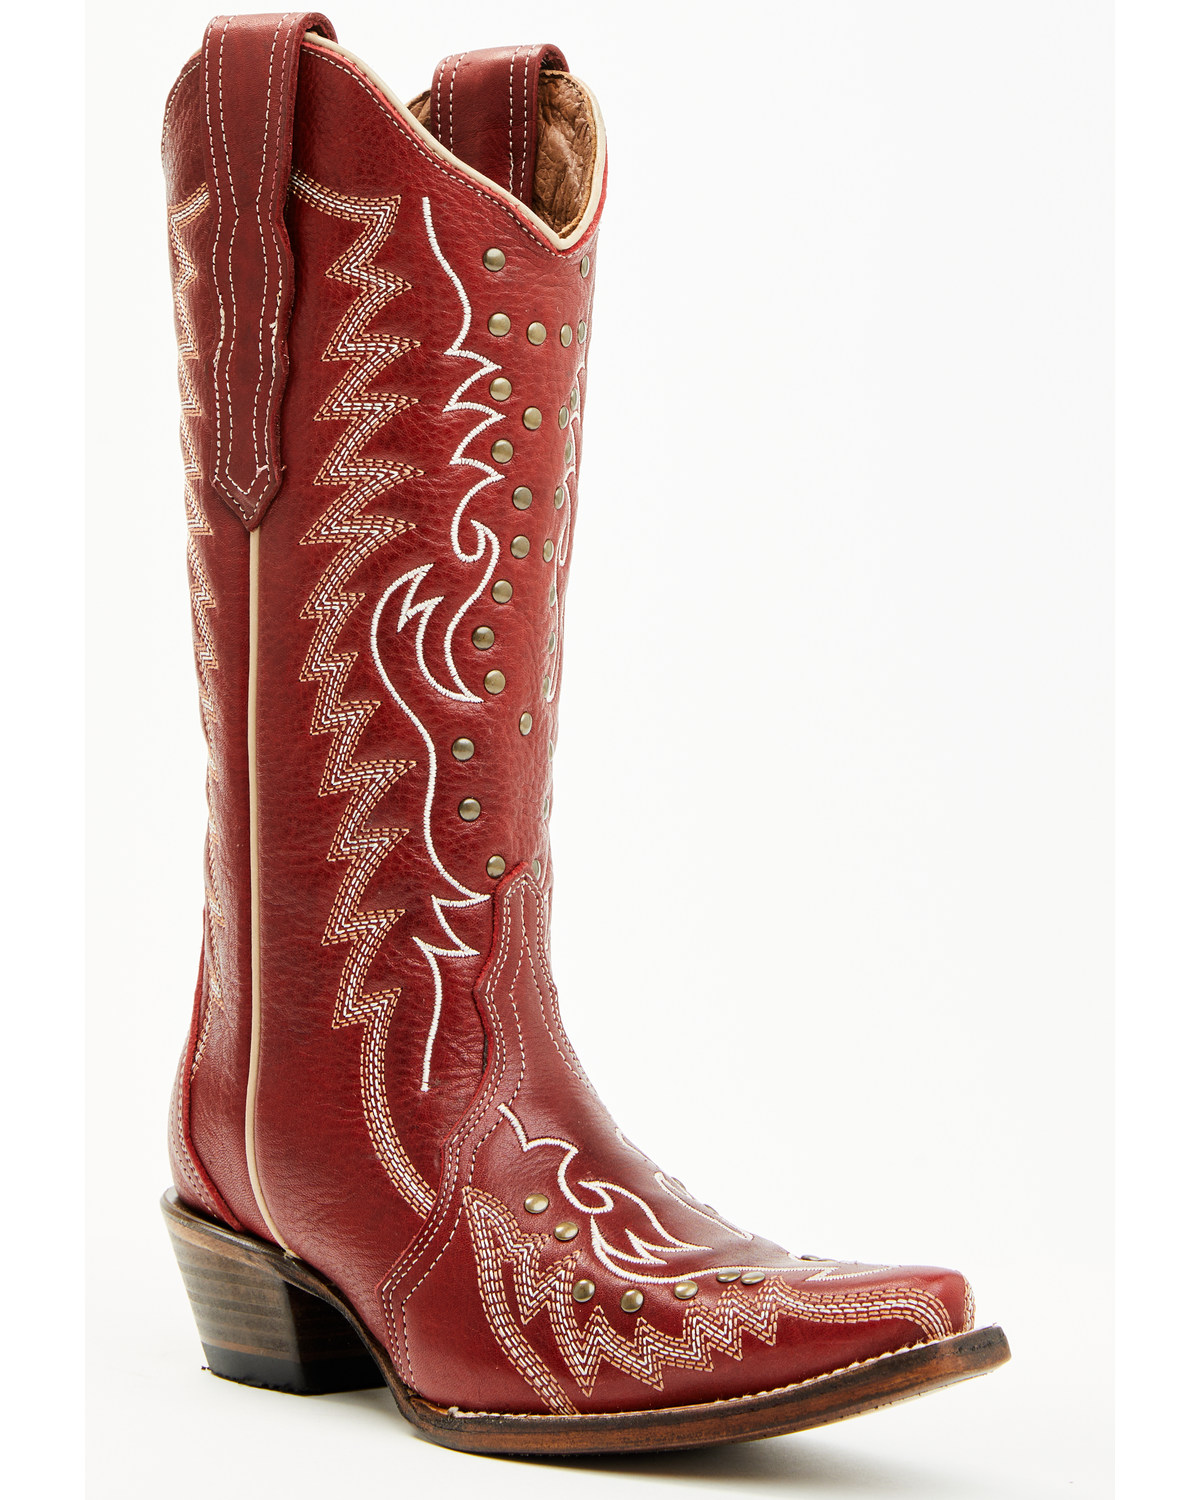 Circle G Women's Studded Western Boots - Snip Toe